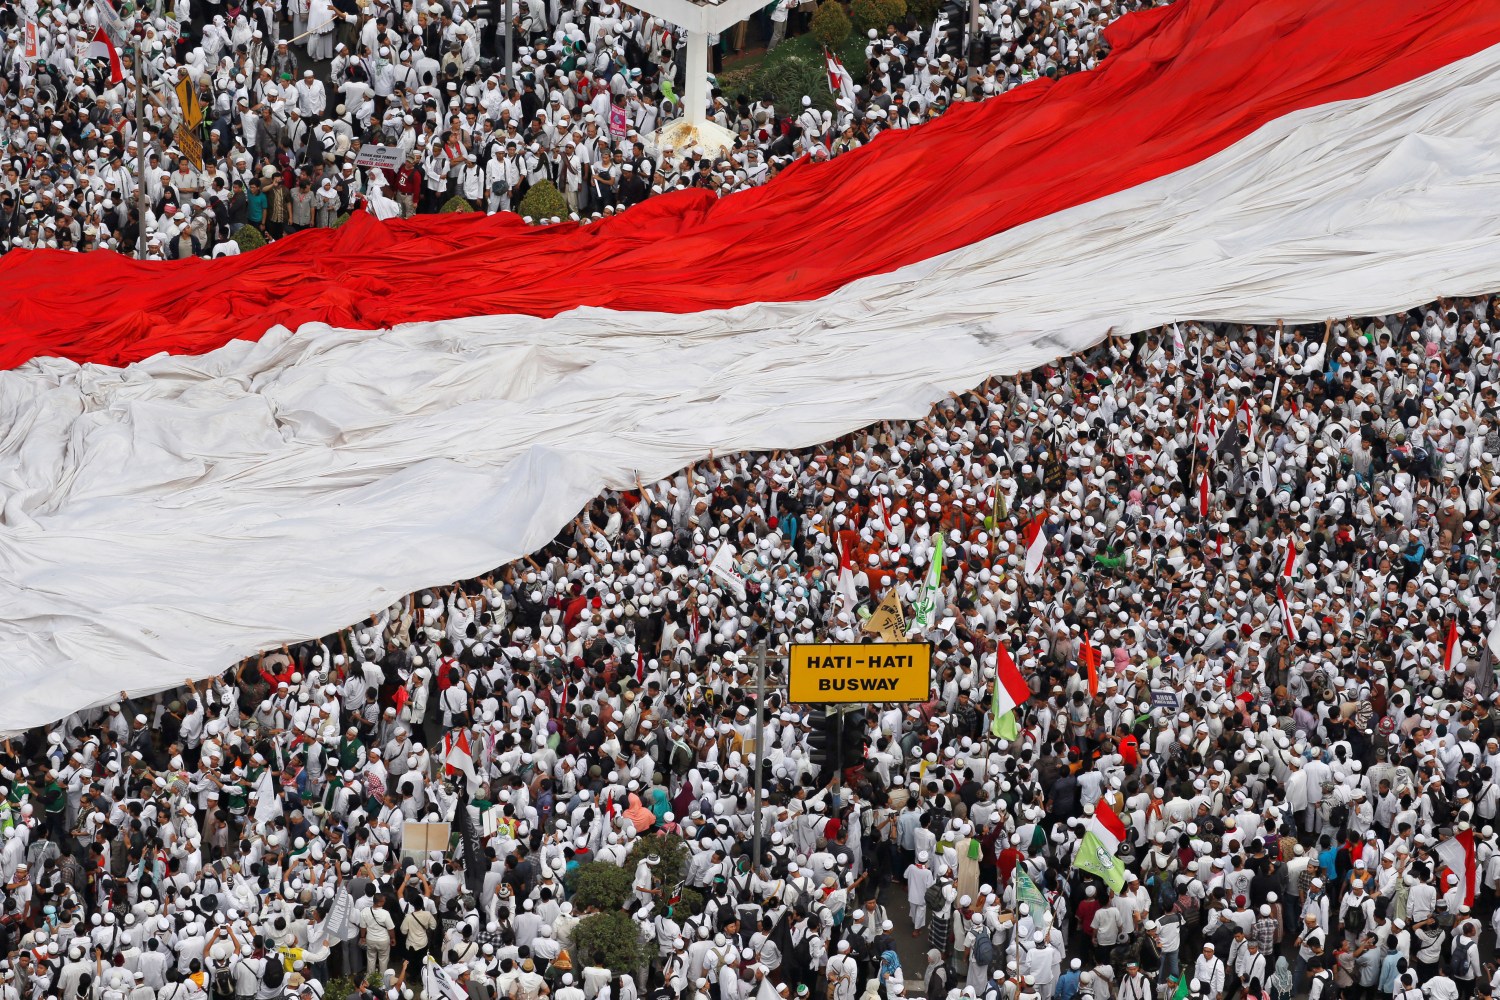 Members of hardline Muslim groups hold a big national flag as they attend a protest against Jakarta's incumbent governor Basuki Tjahaja Purnama